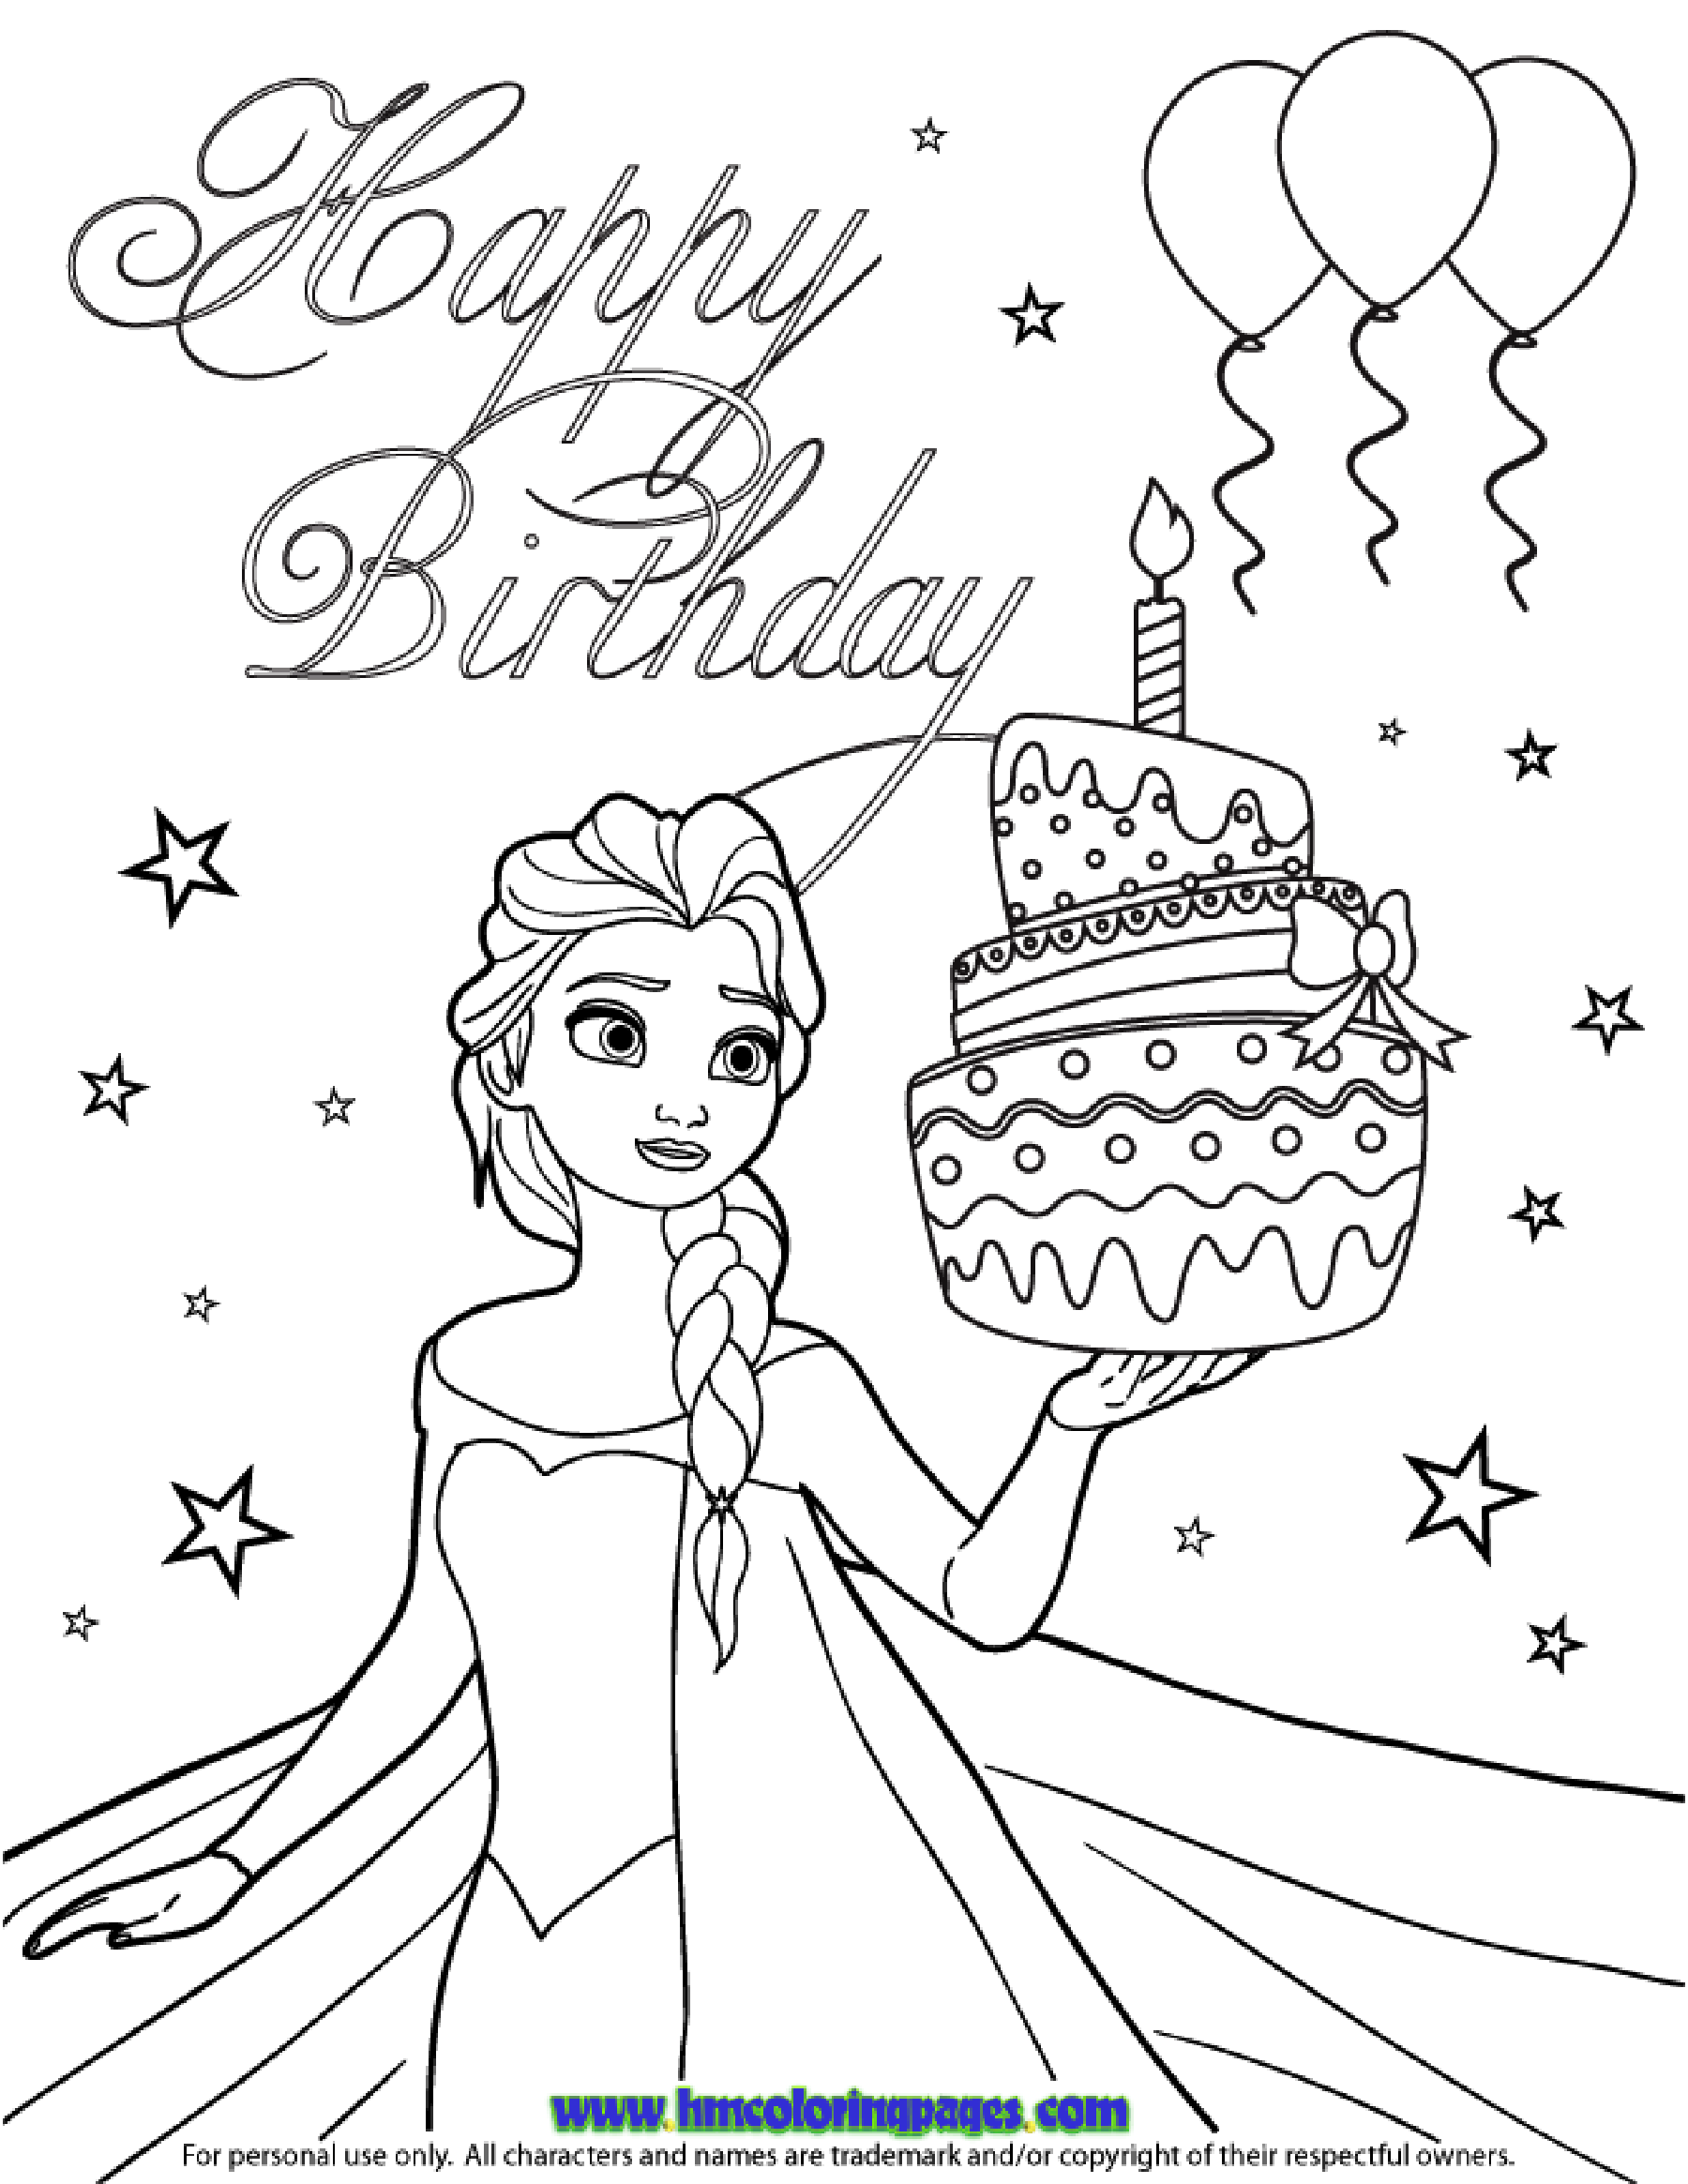 Frozen to color for children   Frozen Kids Coloring Pages